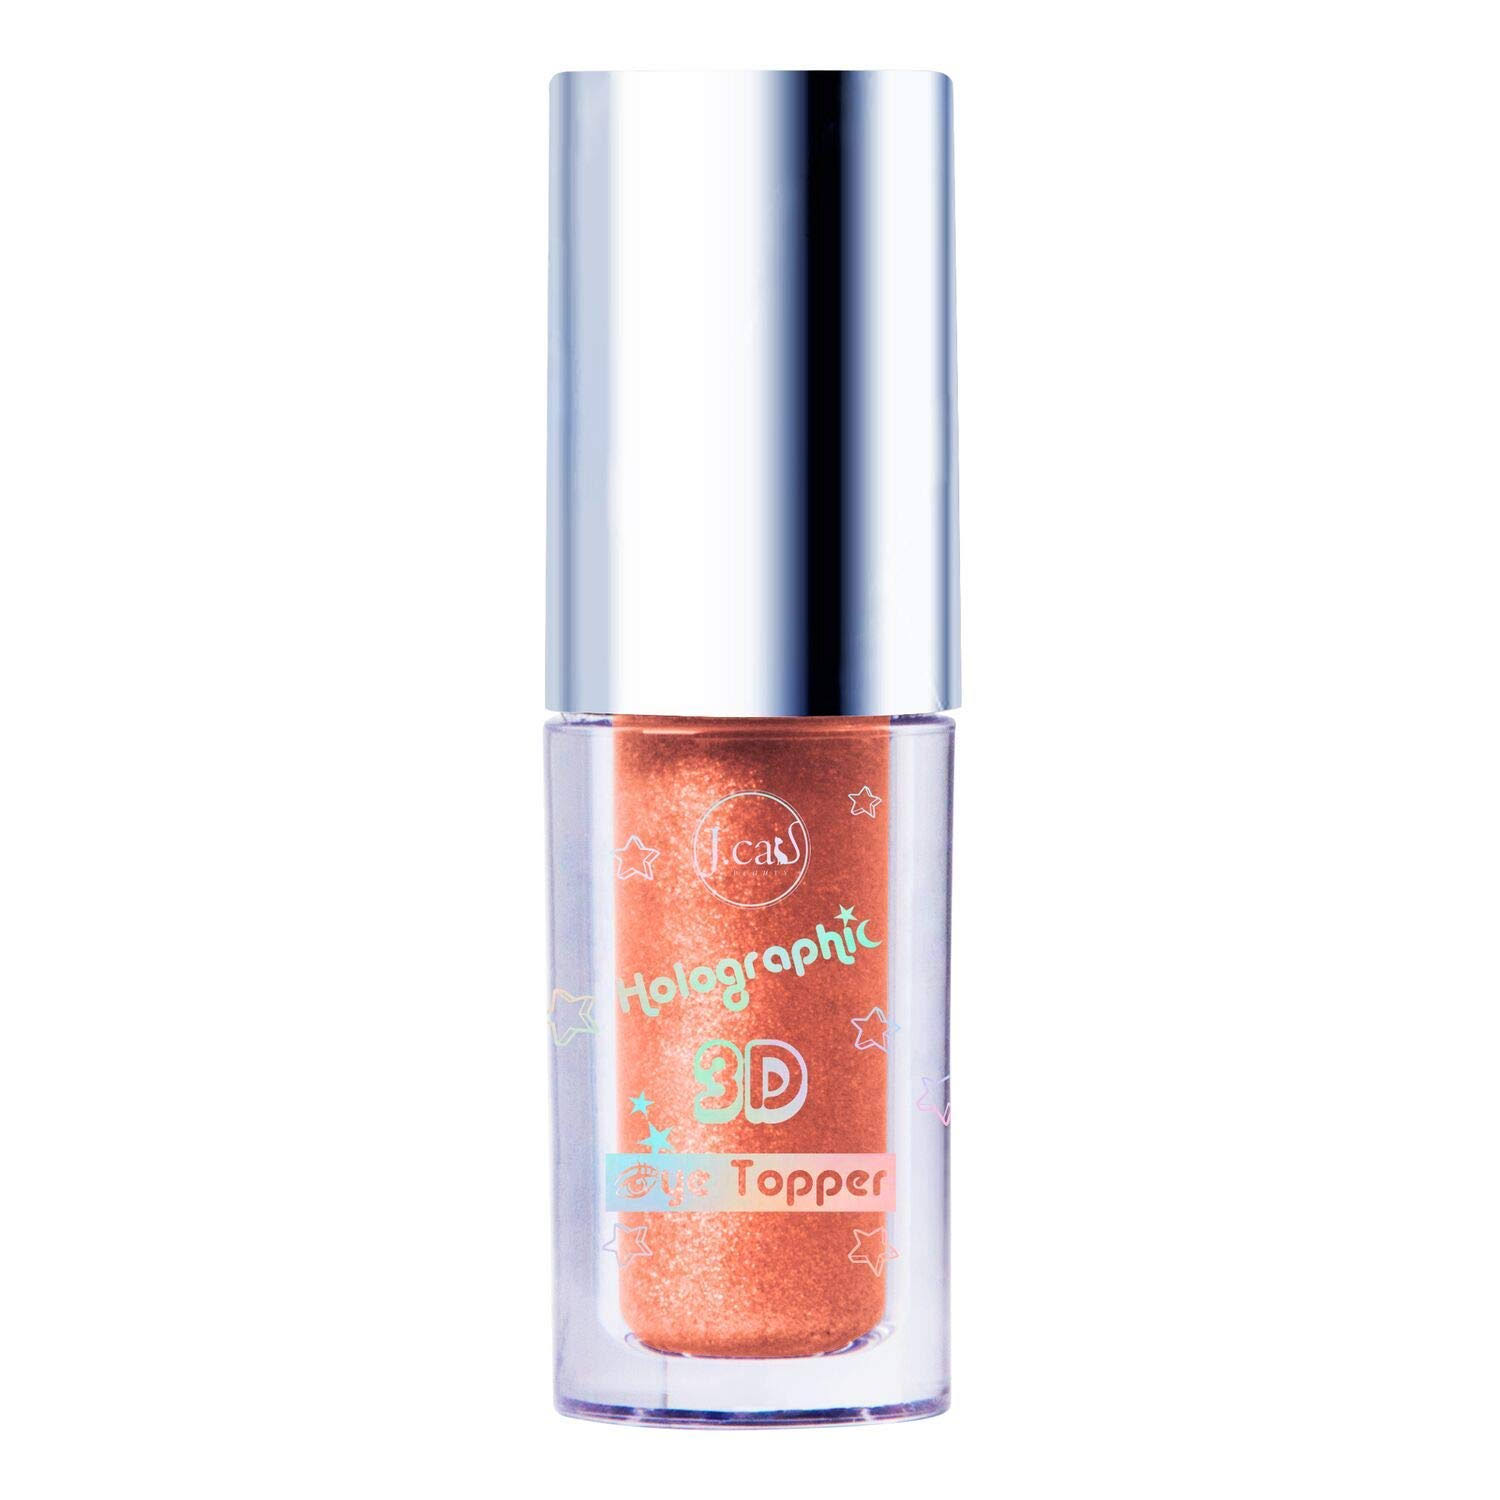 J. CAT BEAUTY Holographic 3d Eye Topper - Pinch Me, Peachy